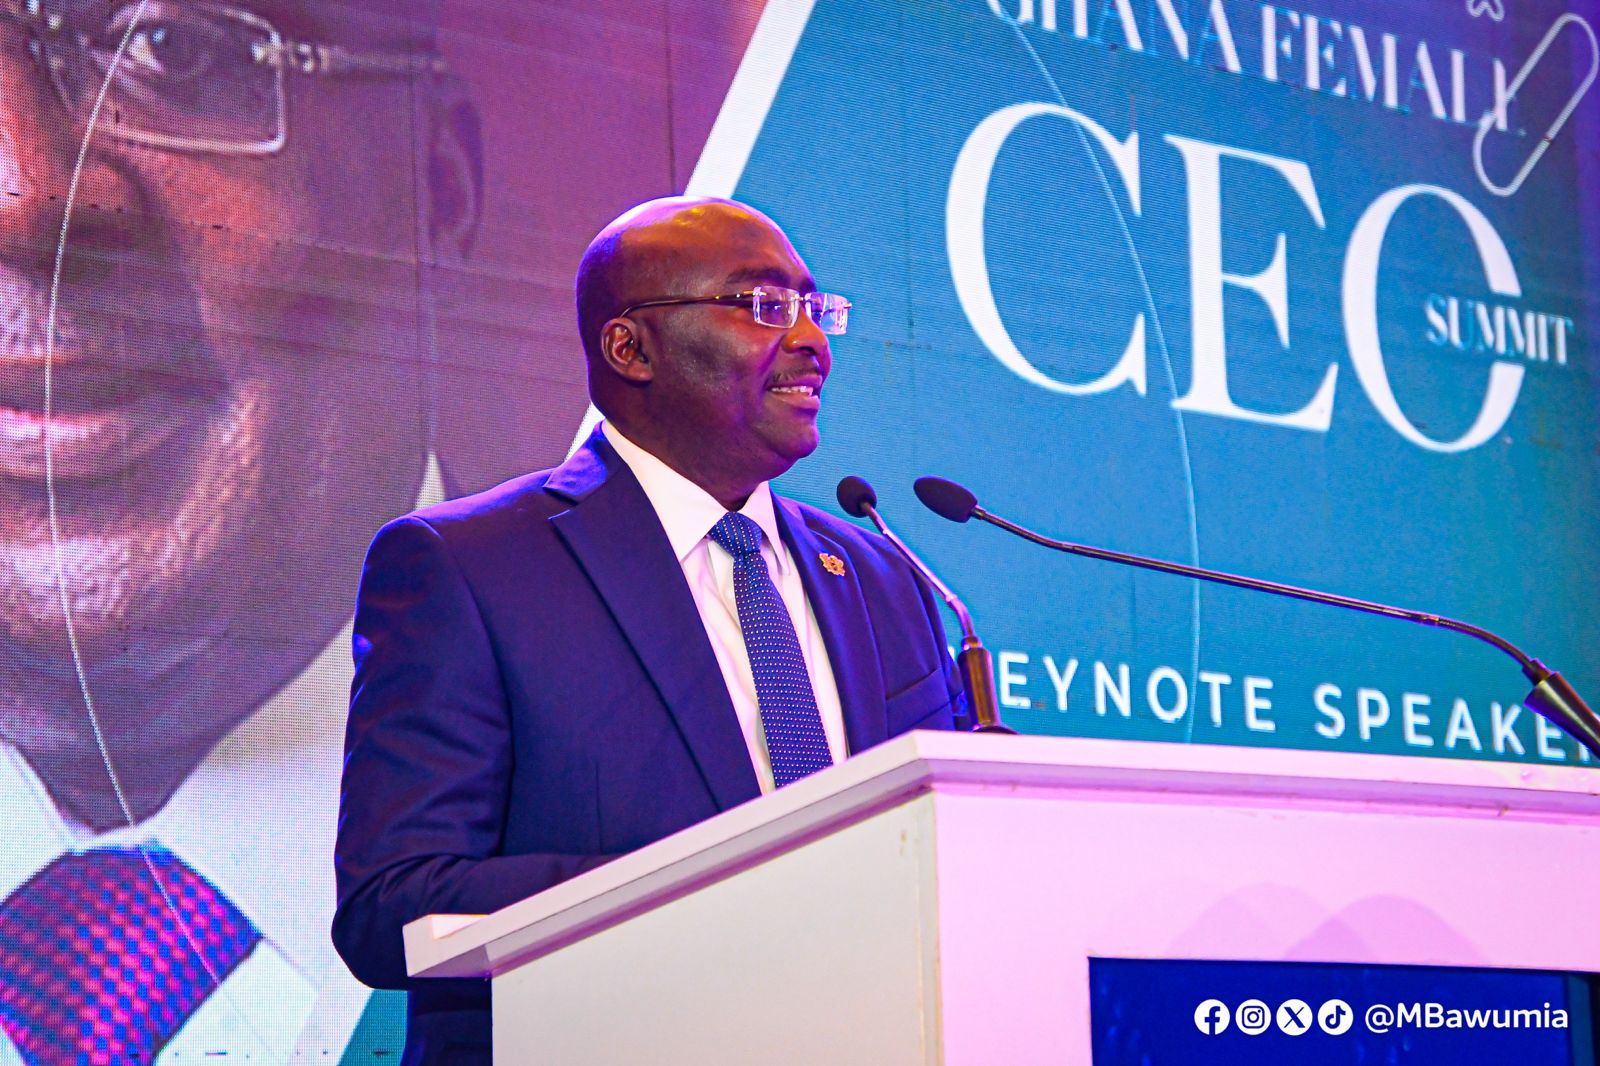 Bawumia calls for more focus on empowering women for inclusive development